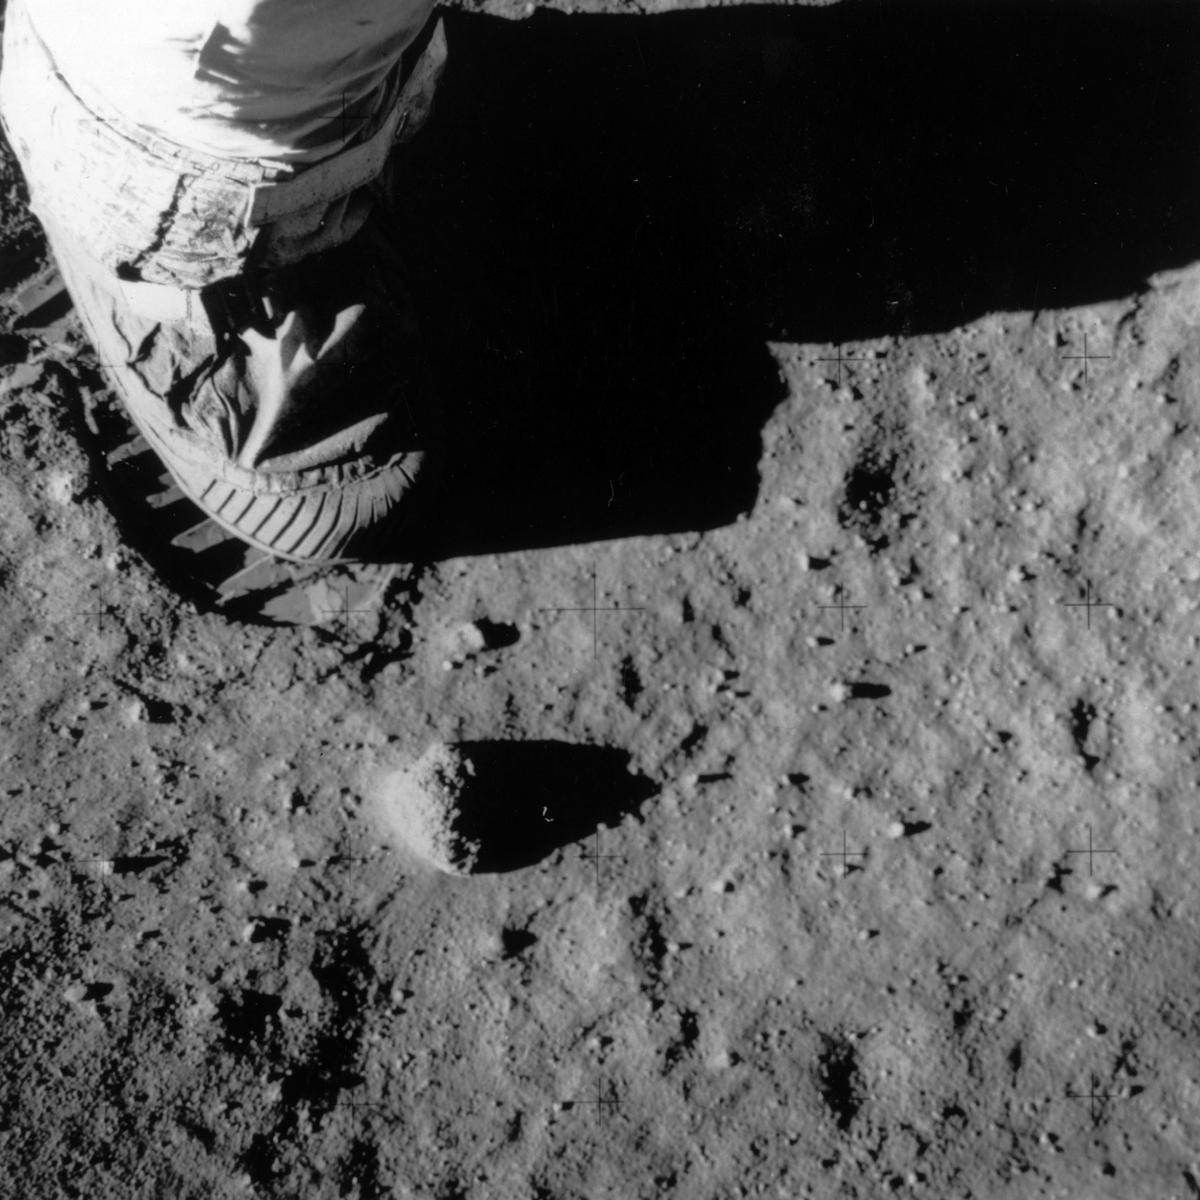 Part of Buzz Aldrin's leg, foot, and footprint on the surface of the Moon during the Apollo 11 lunar mission. (Keystone/Getty Images)